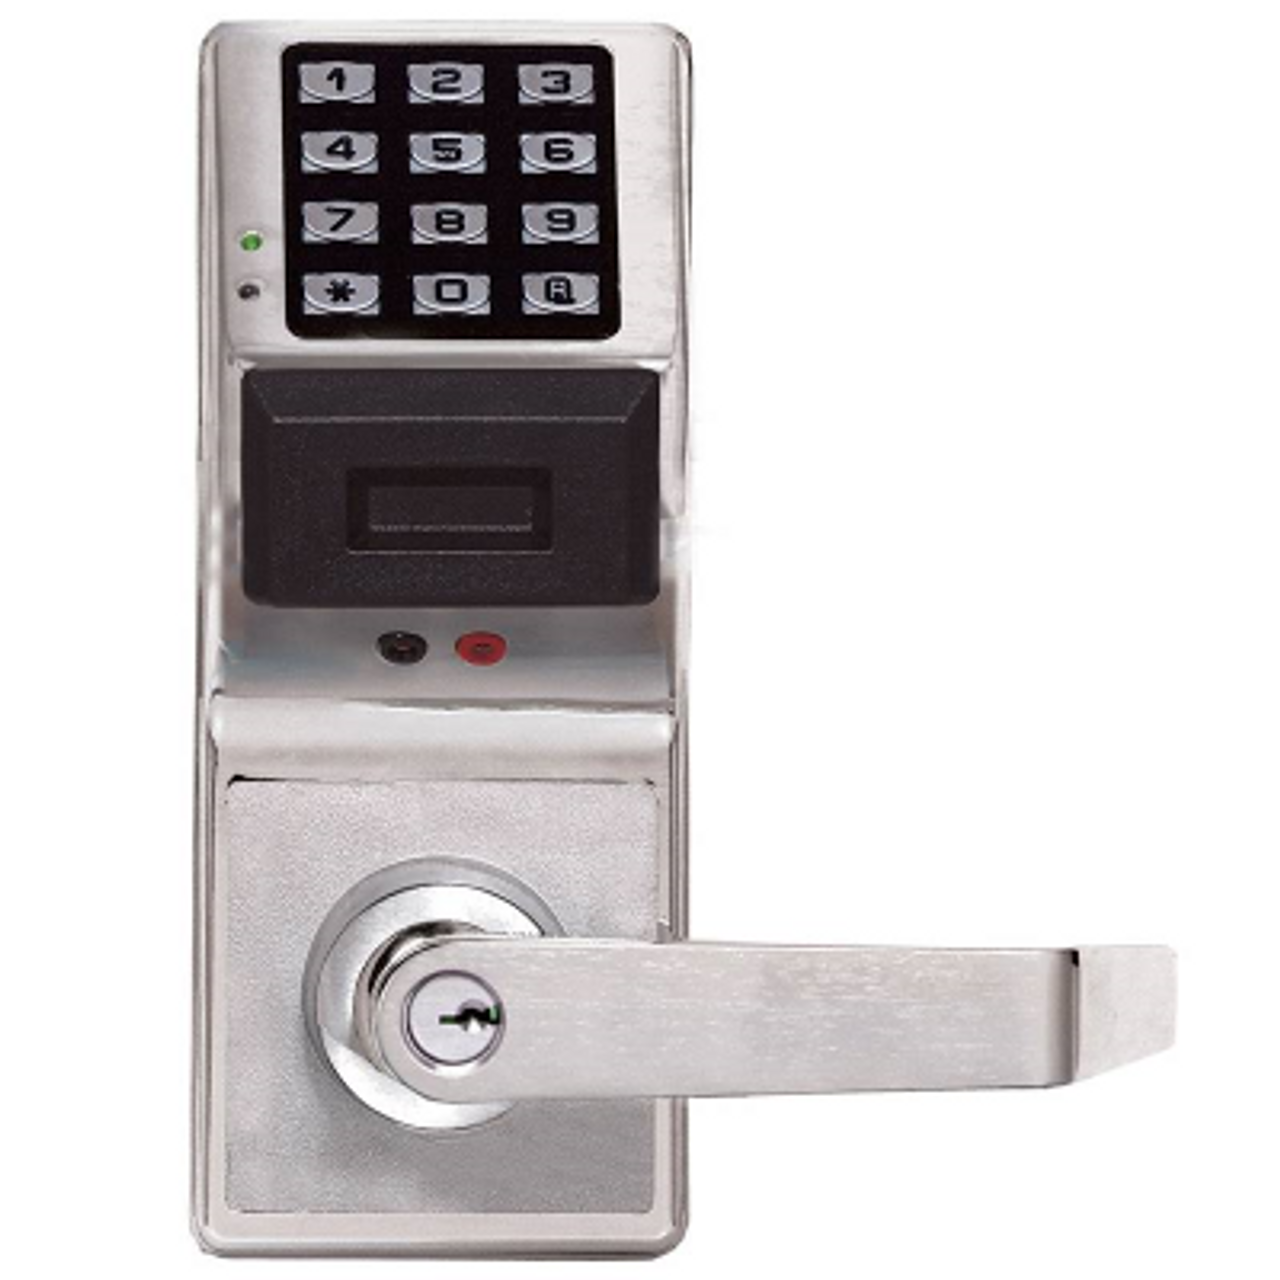 Alarm Lock Trilogy Networx DL6100 Electronic Keyless Access Cylindrical Lock, 5000 Users, with or without Prox Reader